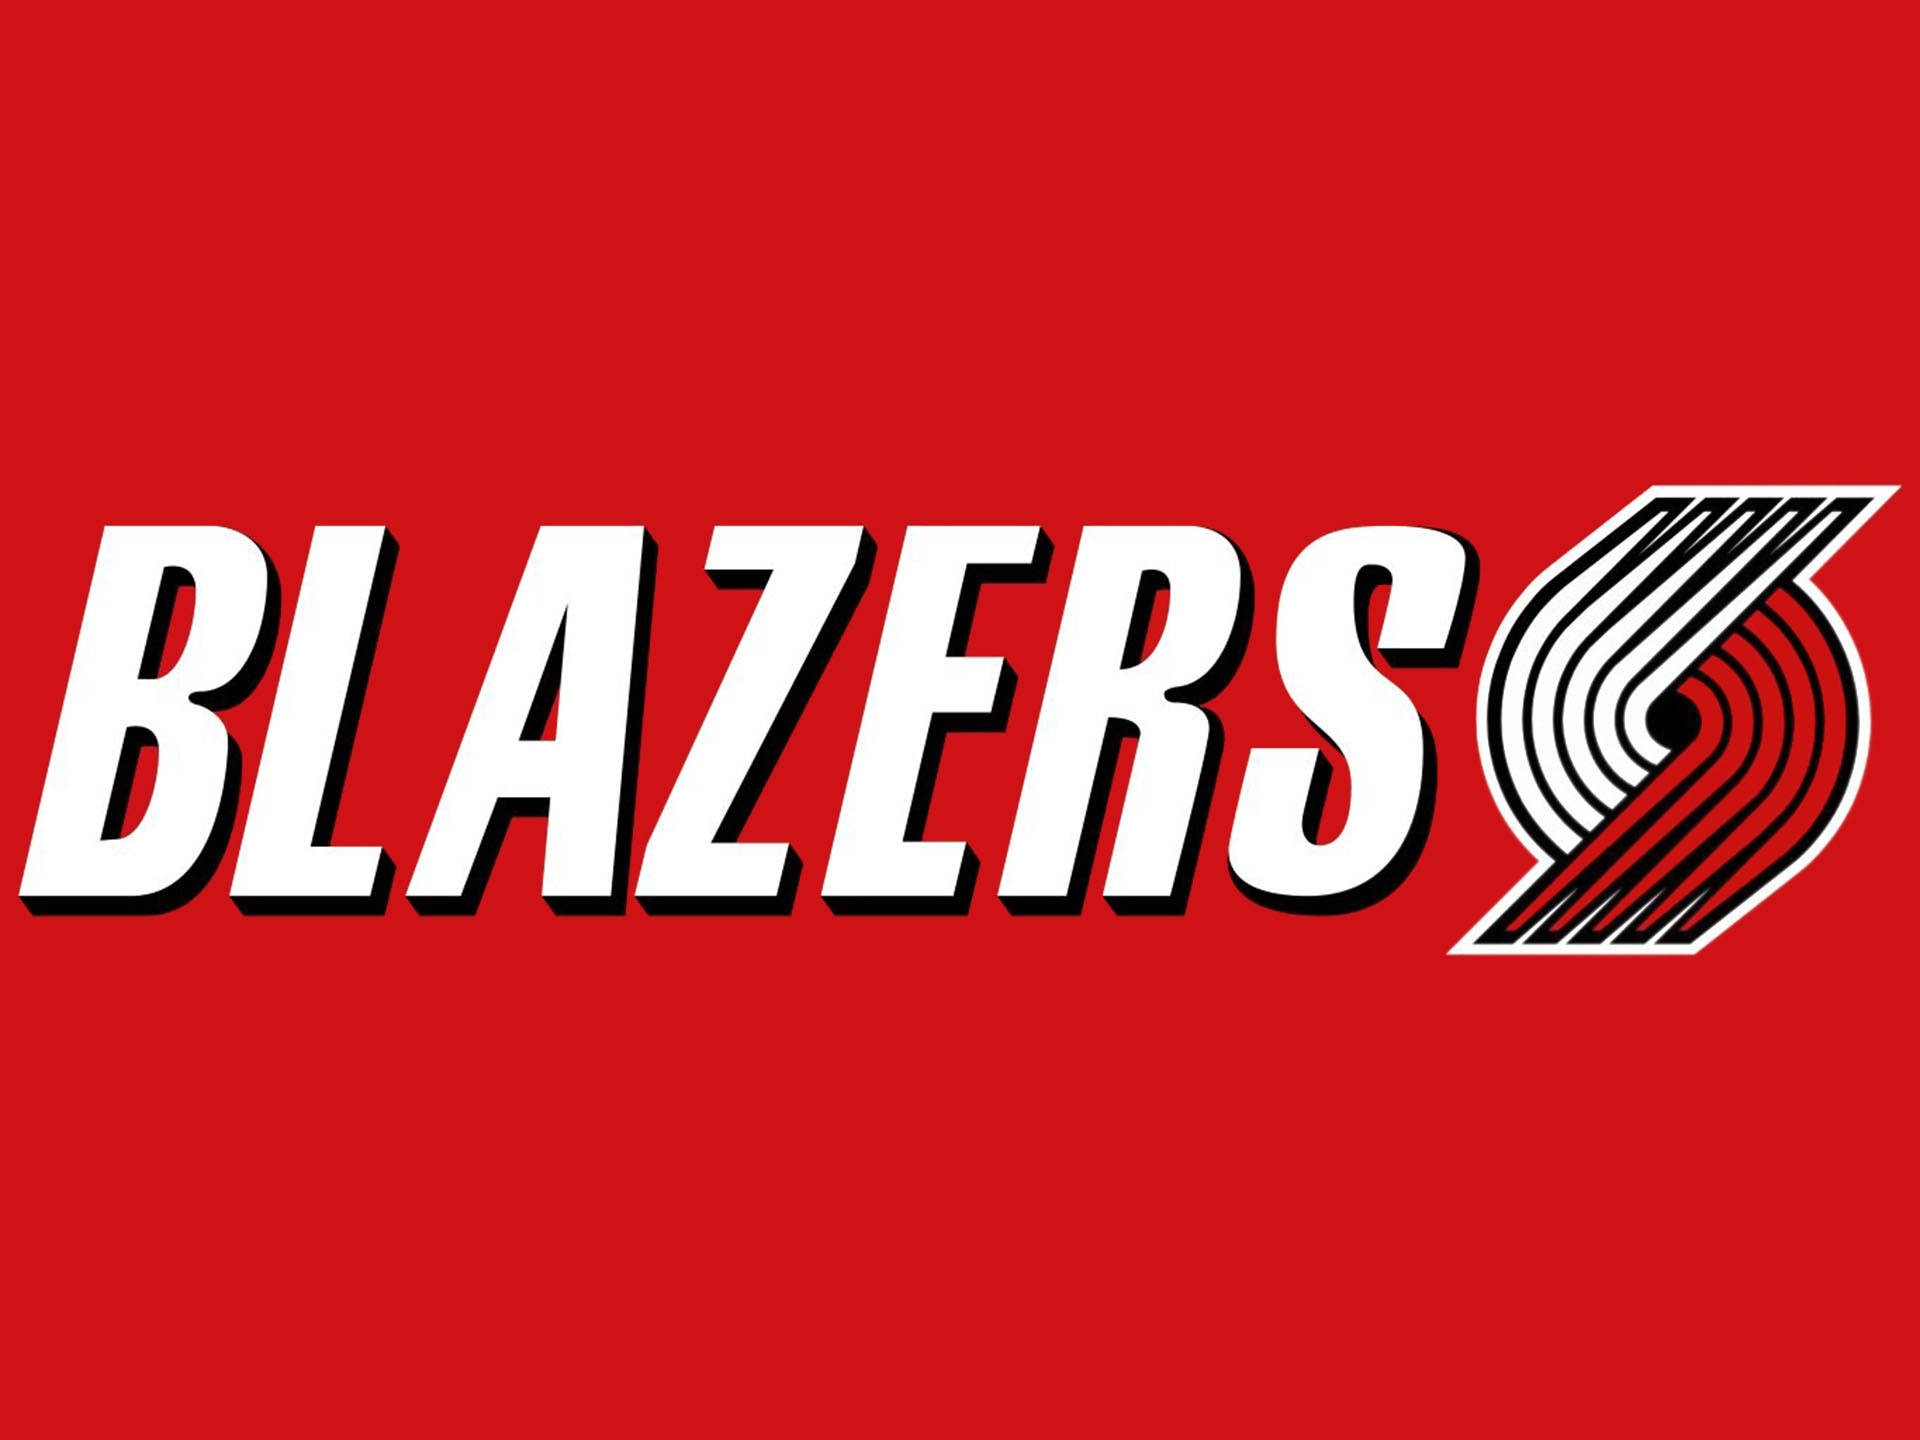 The Noble Logo Of The Portland Trail Blazers Team On A Dynamic Background In Red. Background